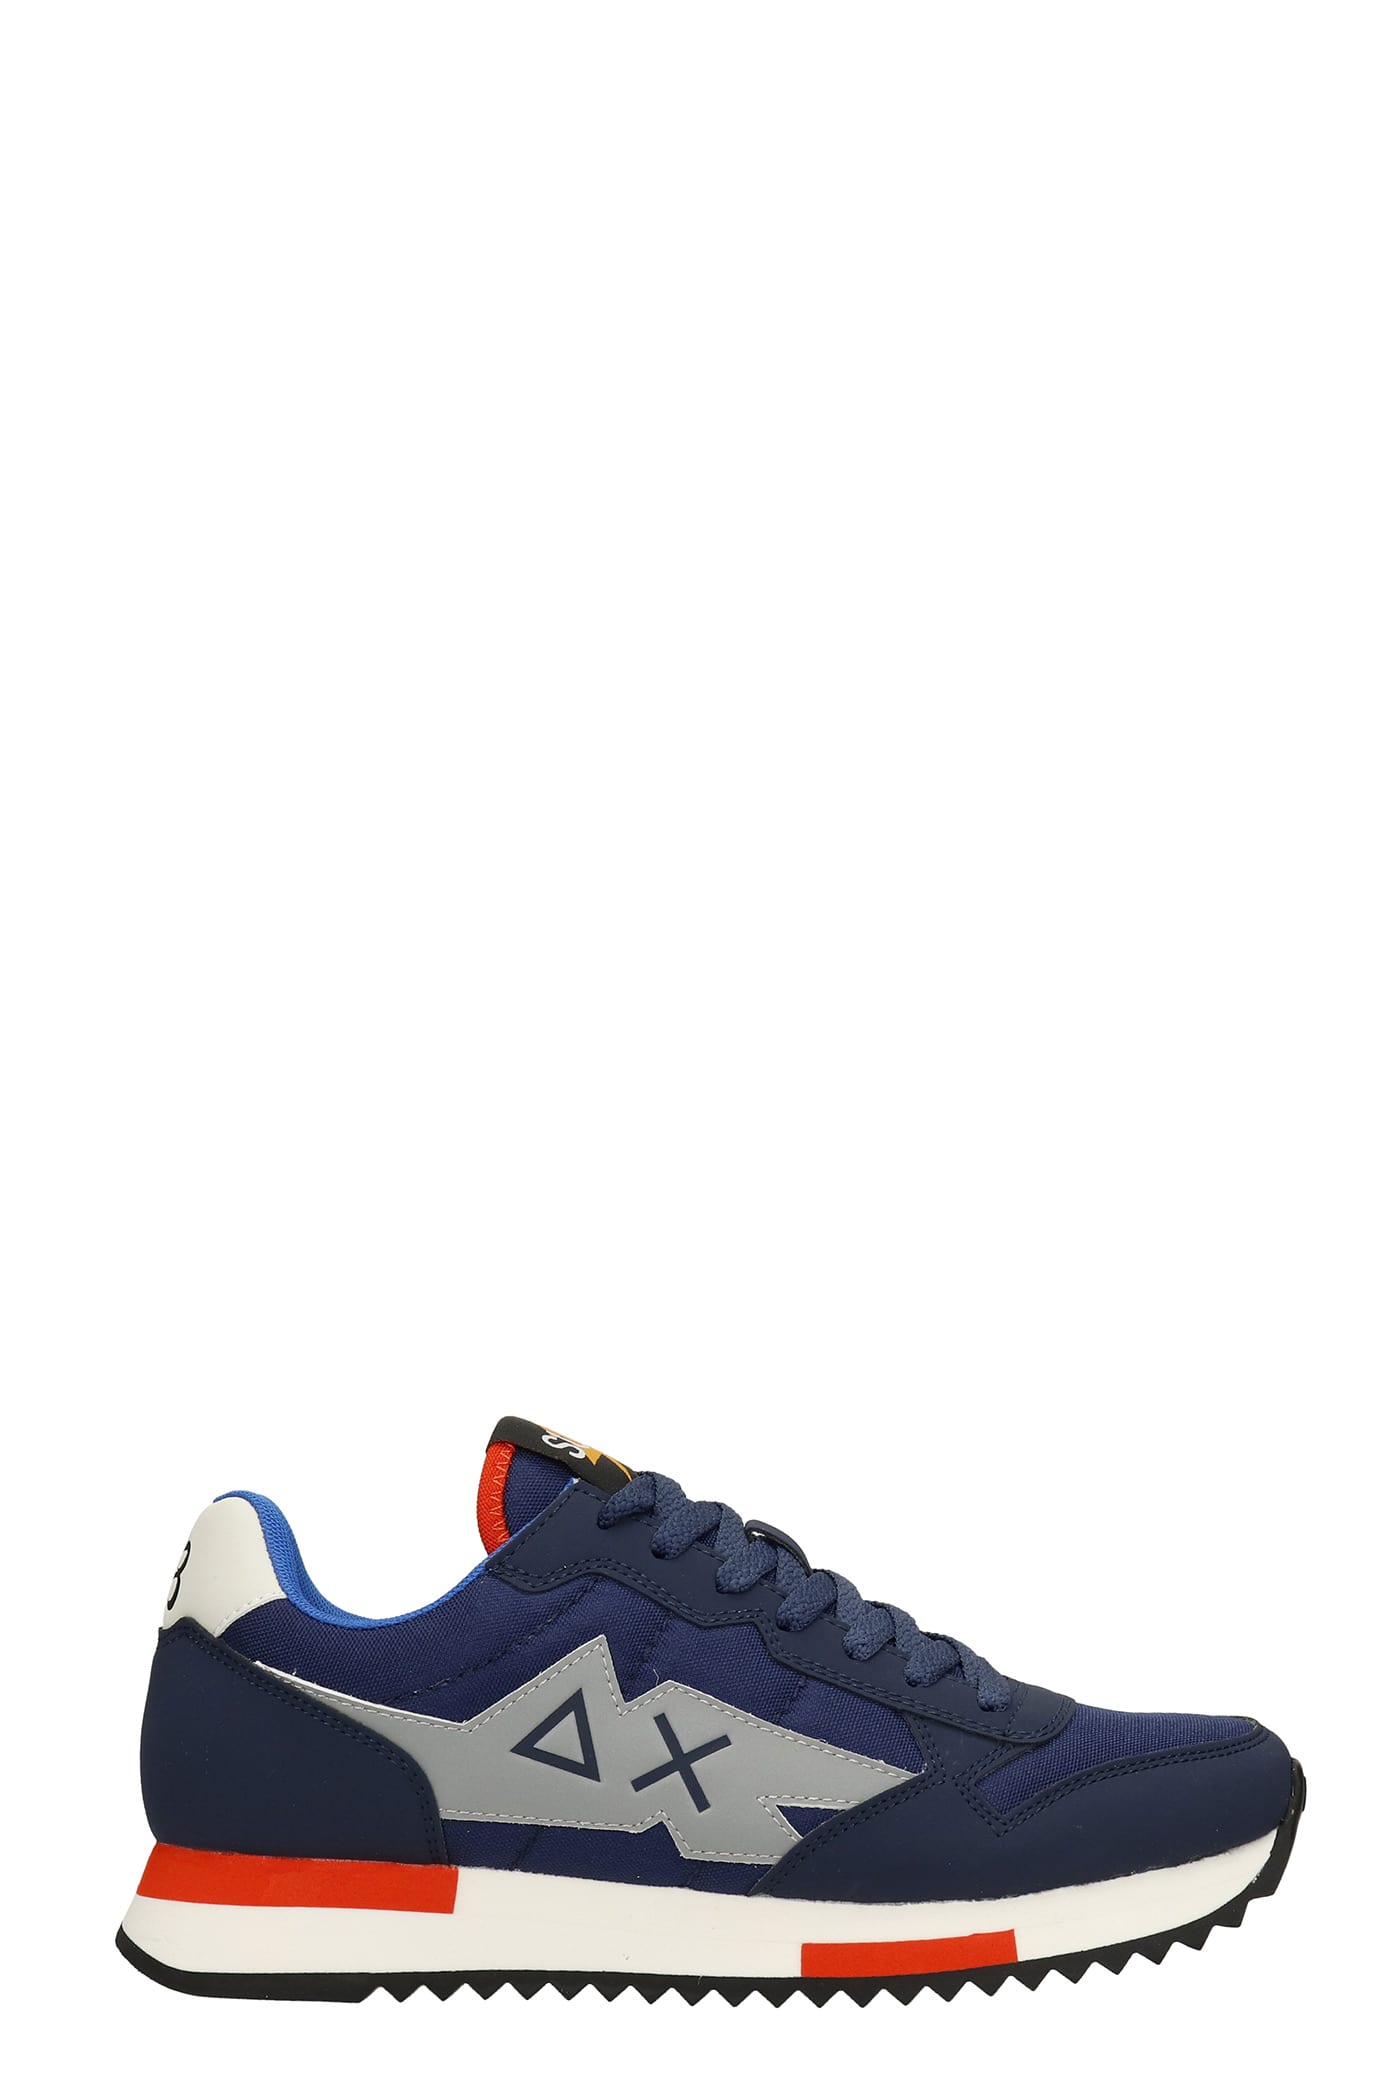 Sun 68 Niki Solid Sneakers In Blue Leather And Fabric